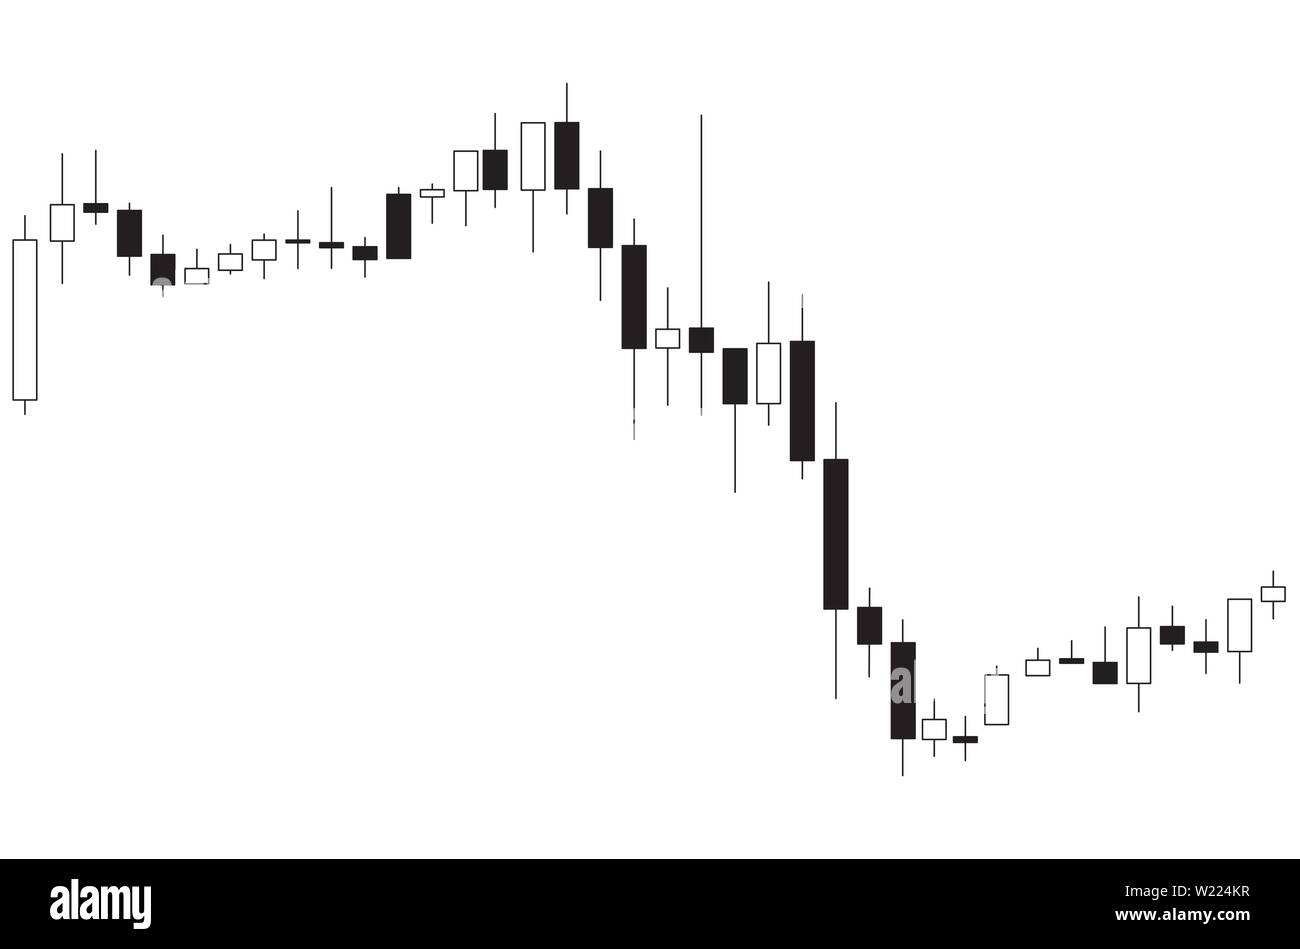 The Art Of Japanese Candlestick Charting